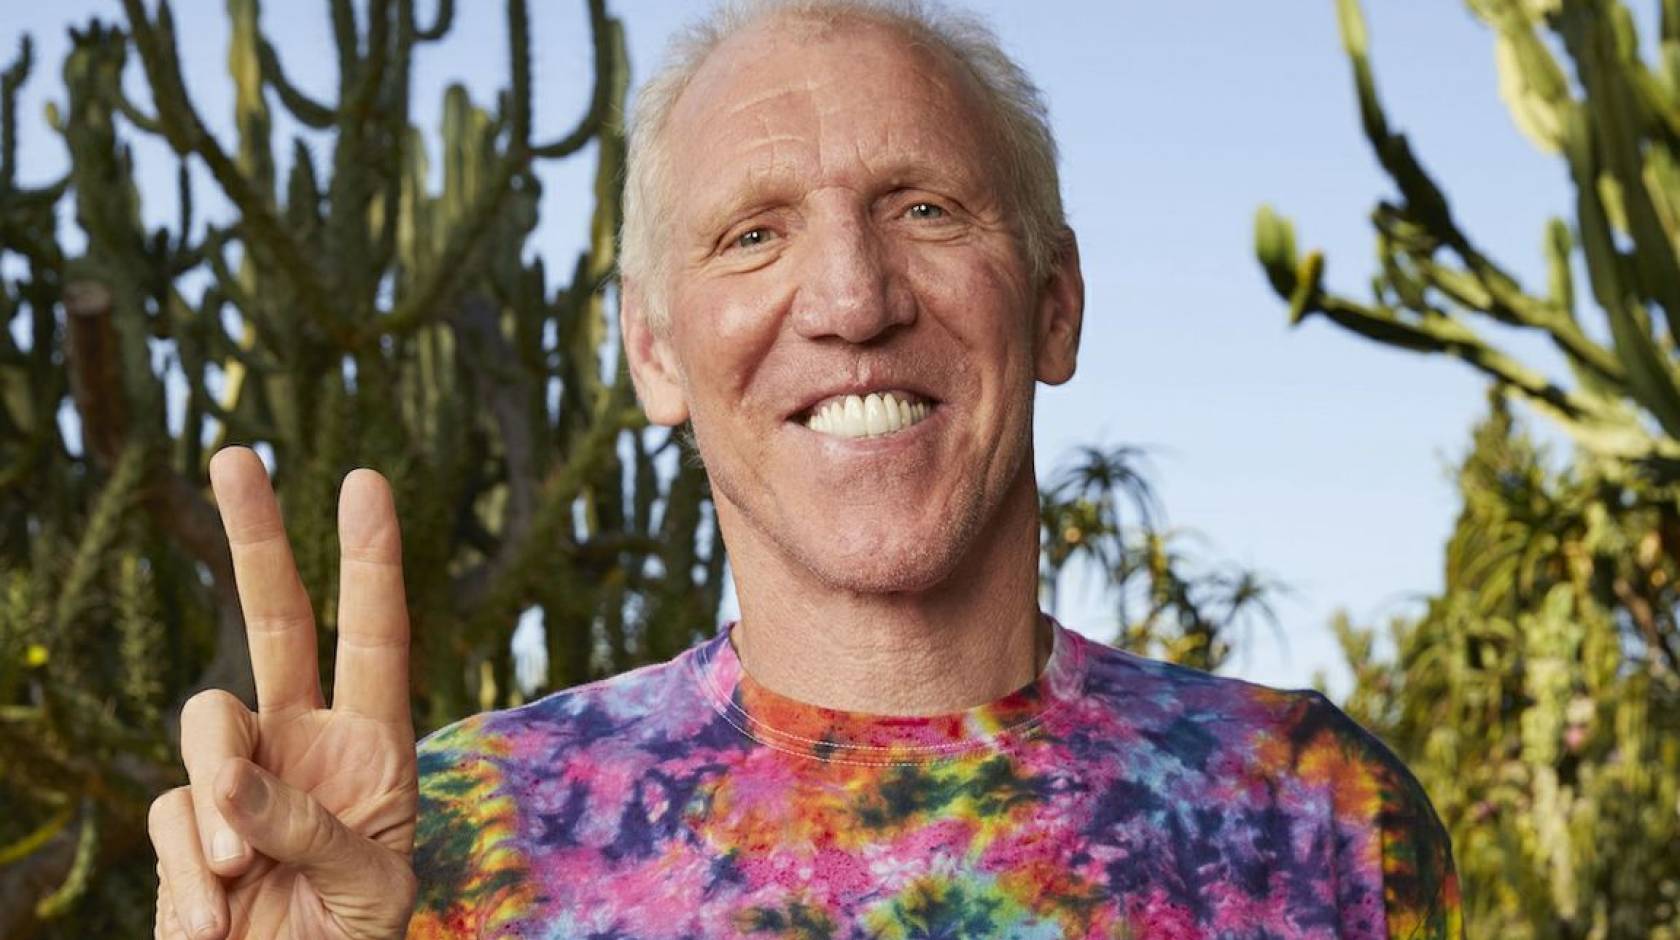 Bill Walton flashes a peace sign while wearing a tie-dyed shirt